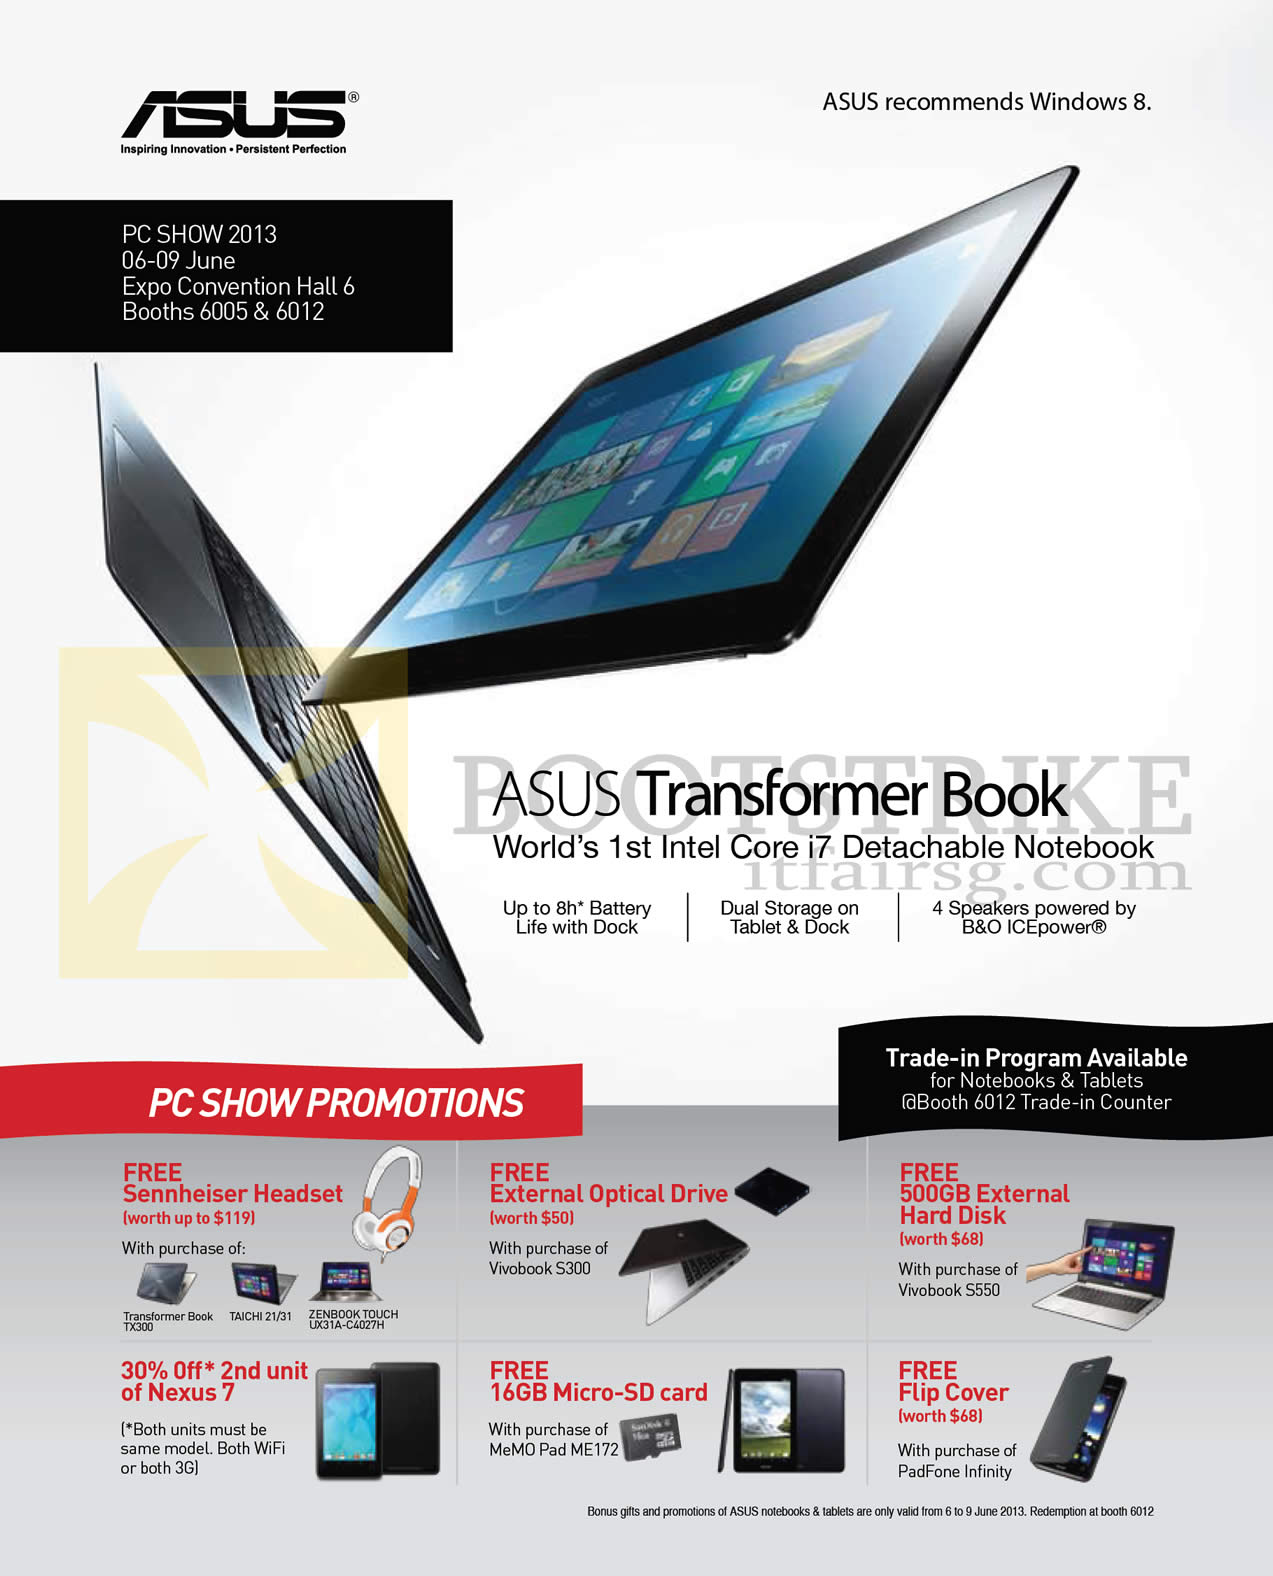 PC SHOW 2013 price list image brochure of ASUS Notebooks Overview Transformer Book, Free Gifts, Trade In